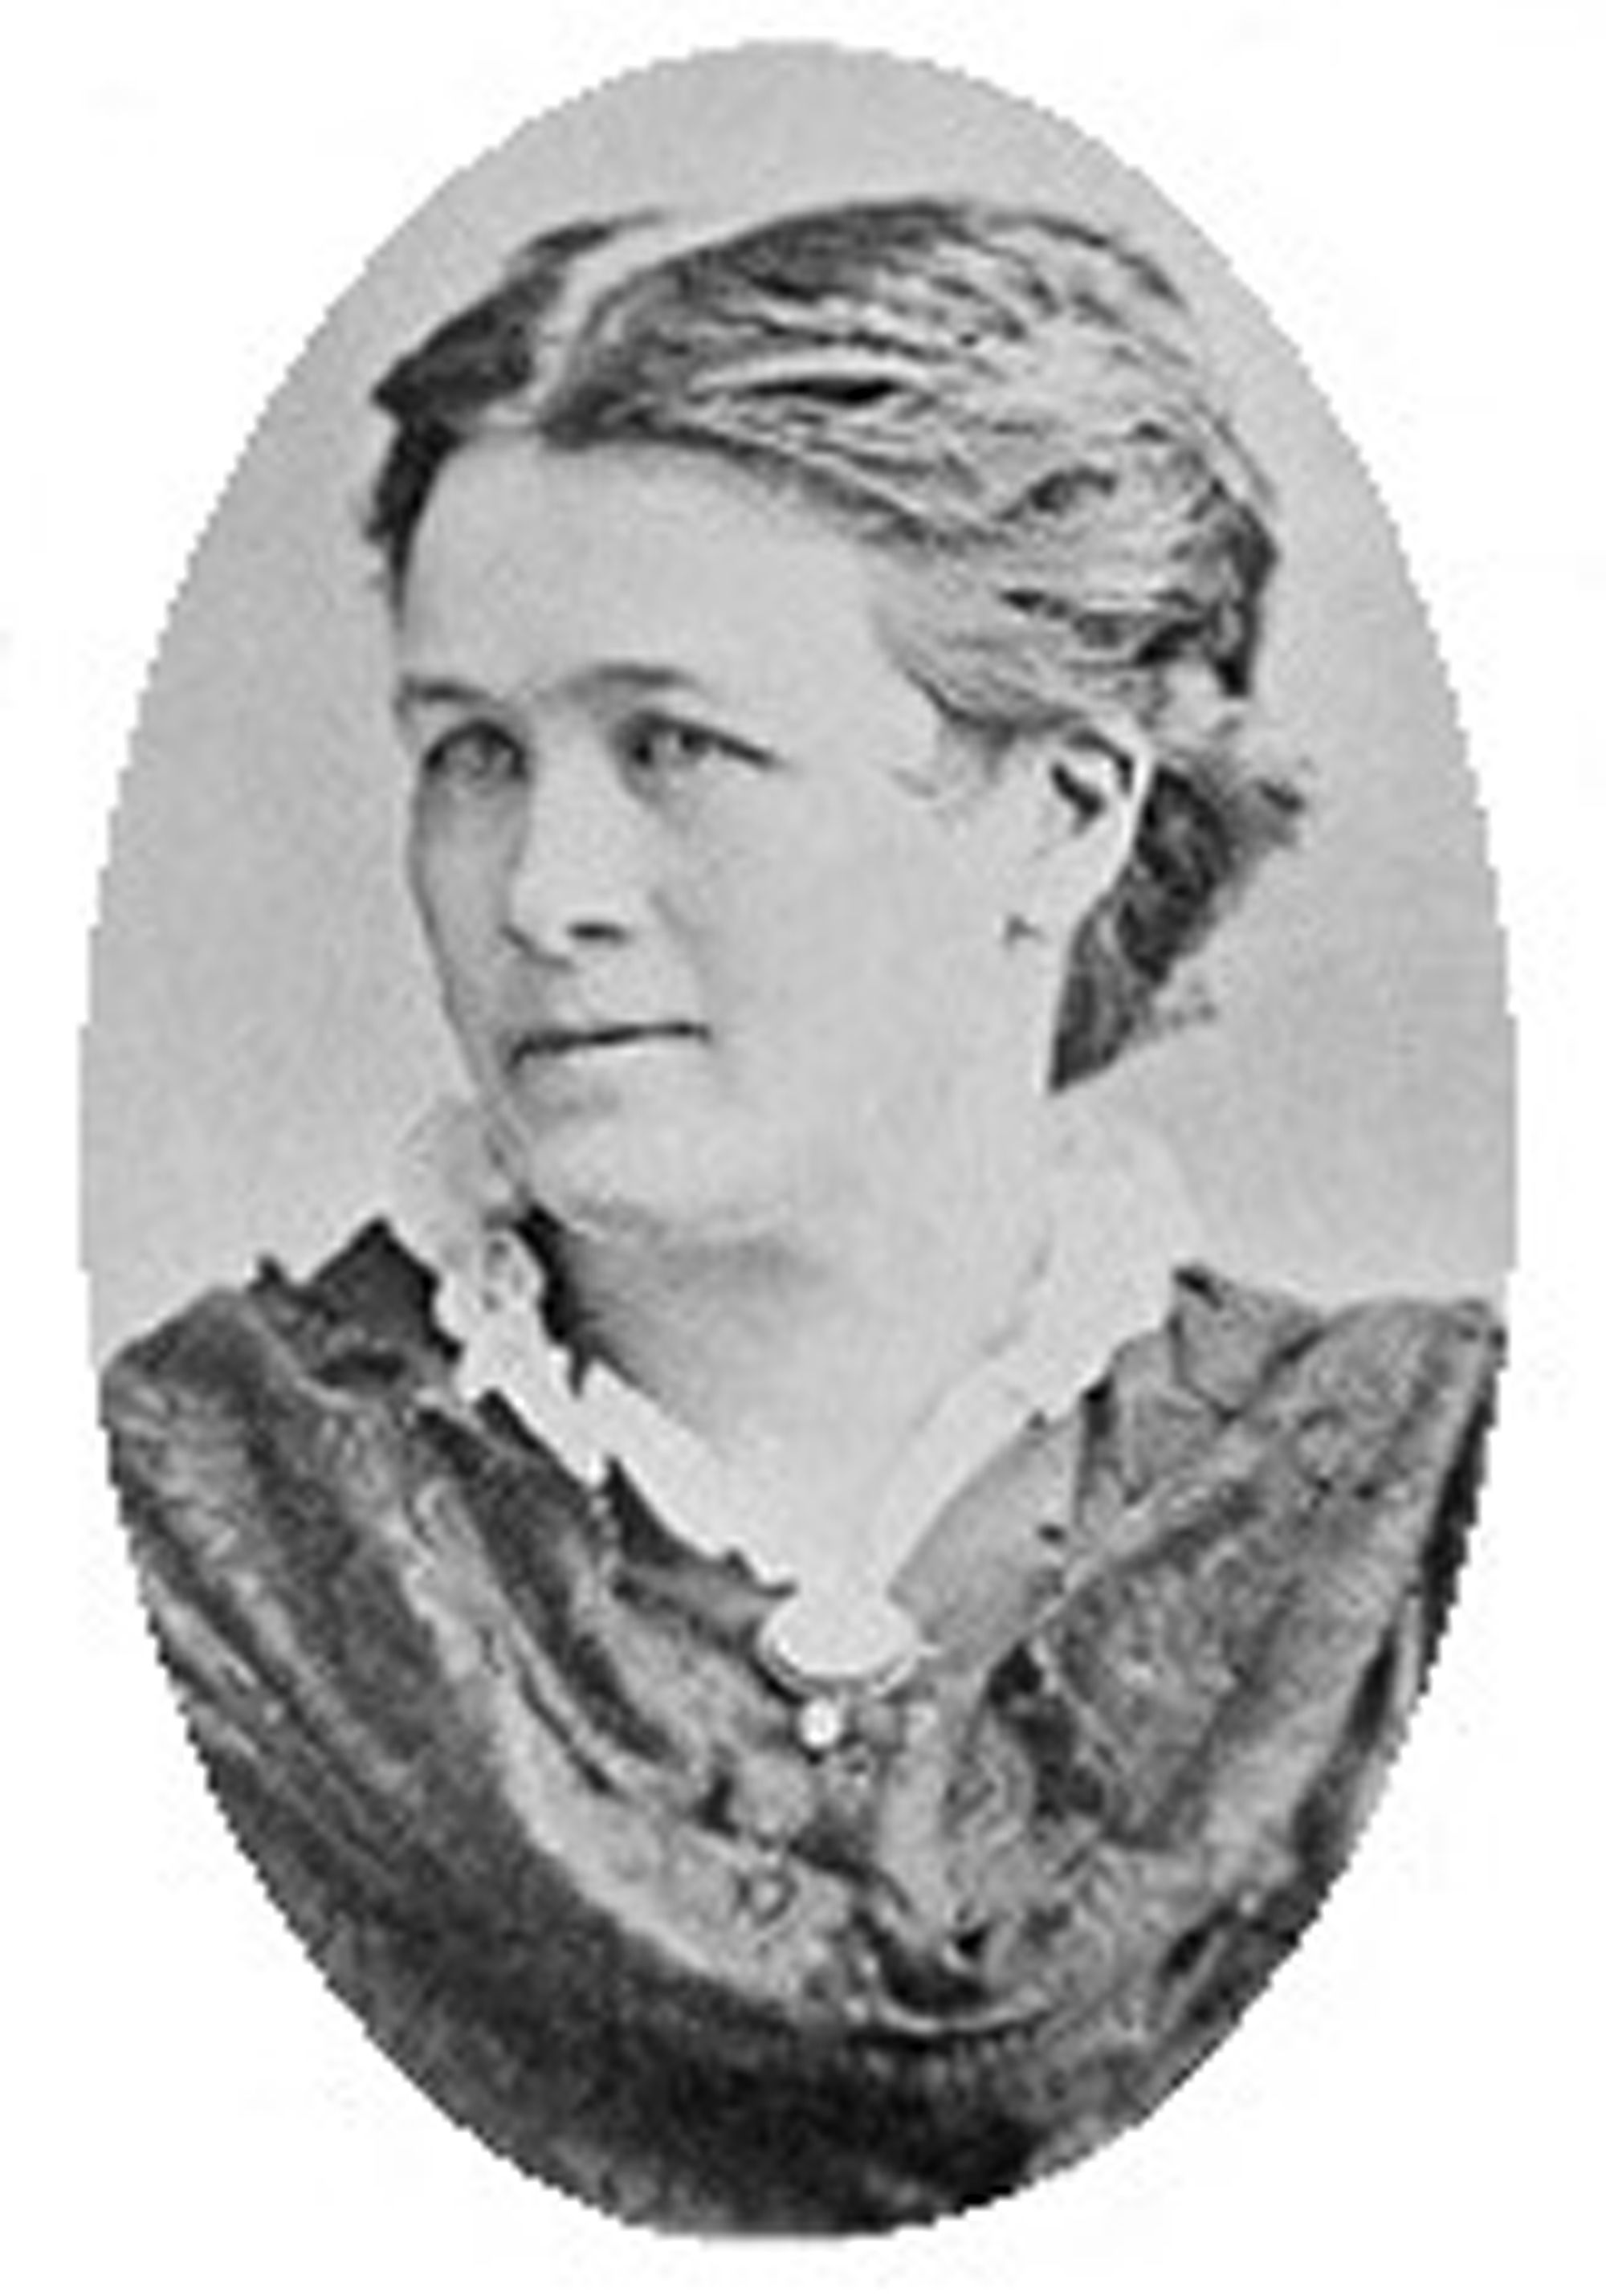 Dr Lucy Hobbs Taylor